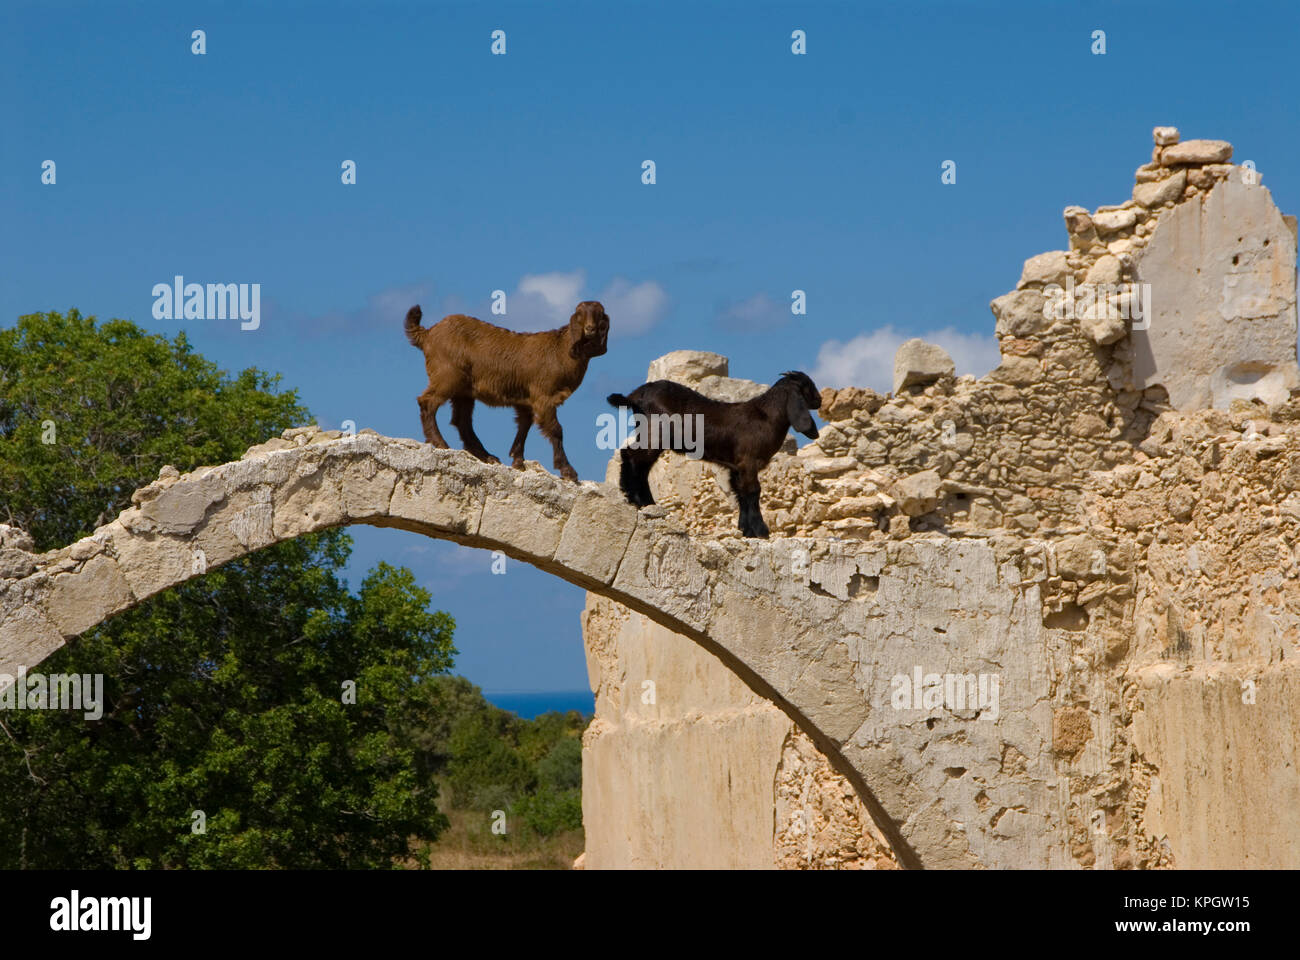 Cyprus, Karpas peninsula, abandoned church of St Elouse near Dipkarpaz, goats above an arc of the destroyed monastery Stock Photo